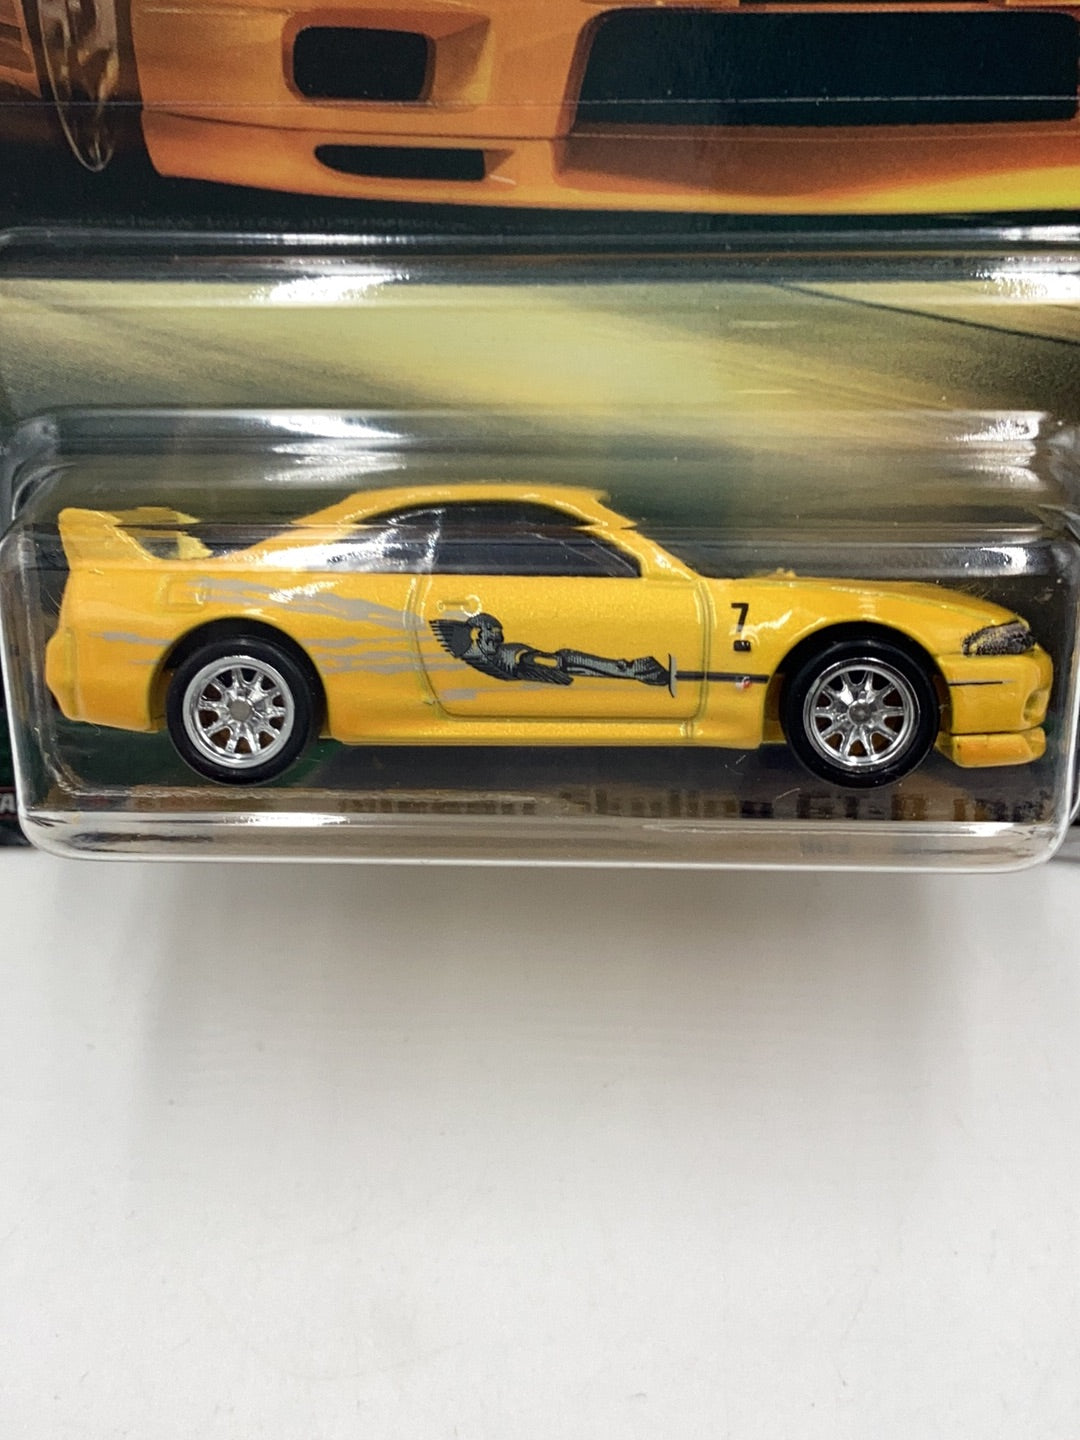 Hot wheels premium fast and furious Original Fast Nissan skyline GT-R bcnr33 5/5 with protector